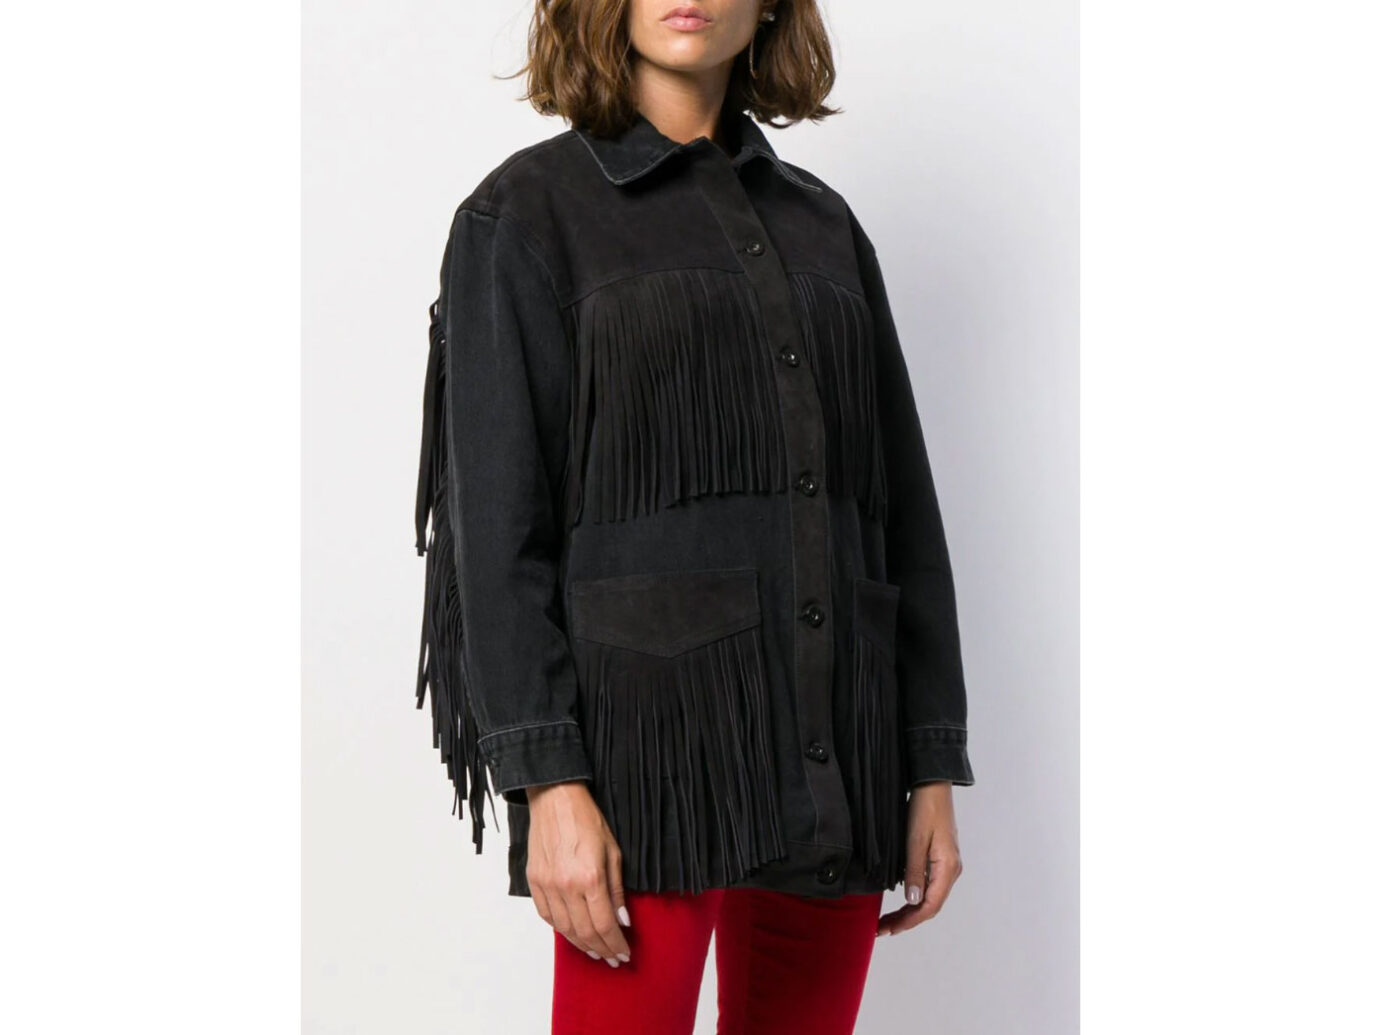 Levi’s Made & Crafted loose-fit fringed jacket